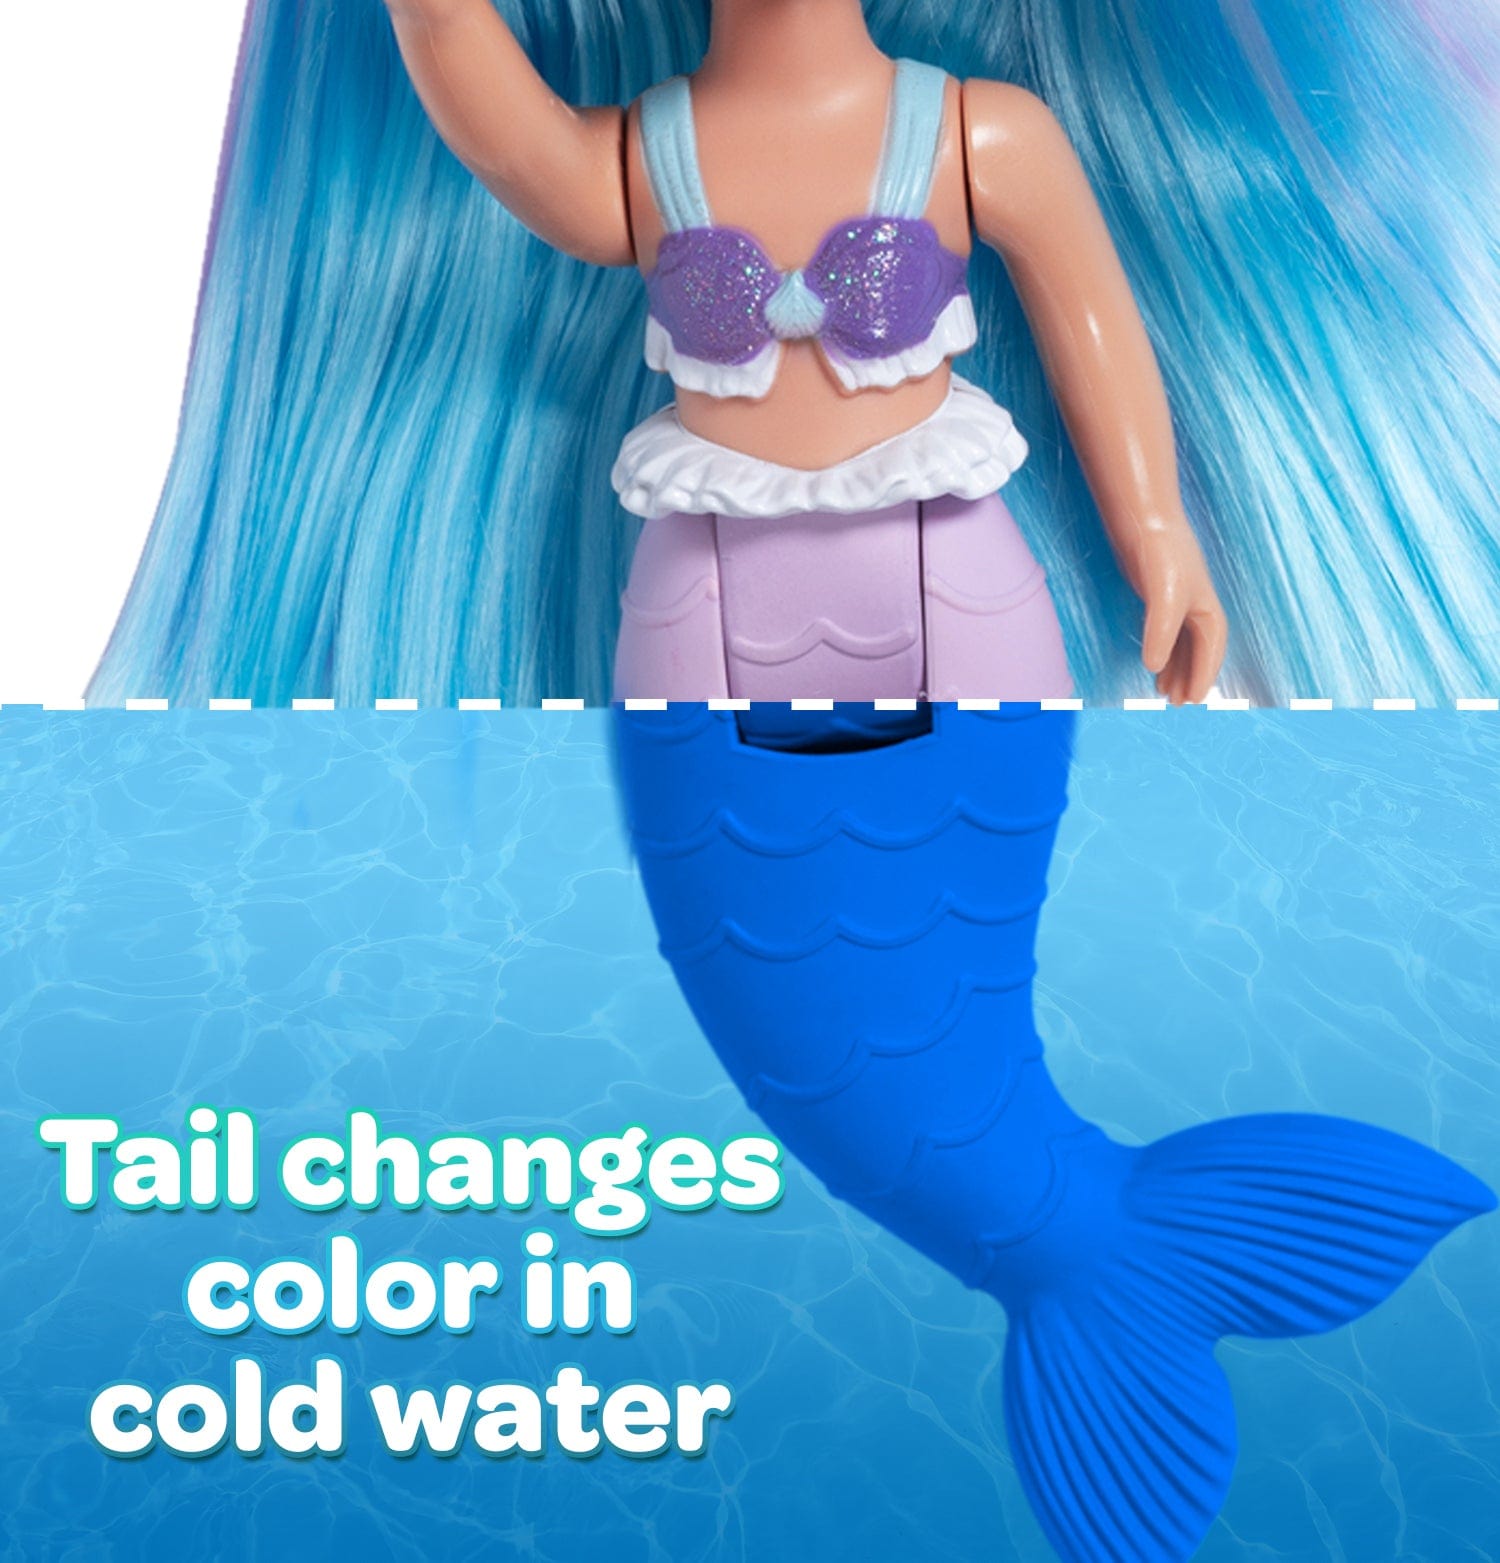 Water Wonder Marina mermaid doll has brightly colored blue hair with purple highlights, a glittery purple bikini top, and white ruffle accents. Her beautiful mermaid doll tail changes from lilac purple to blue when she’s swimming in cold water. Ages 1+.